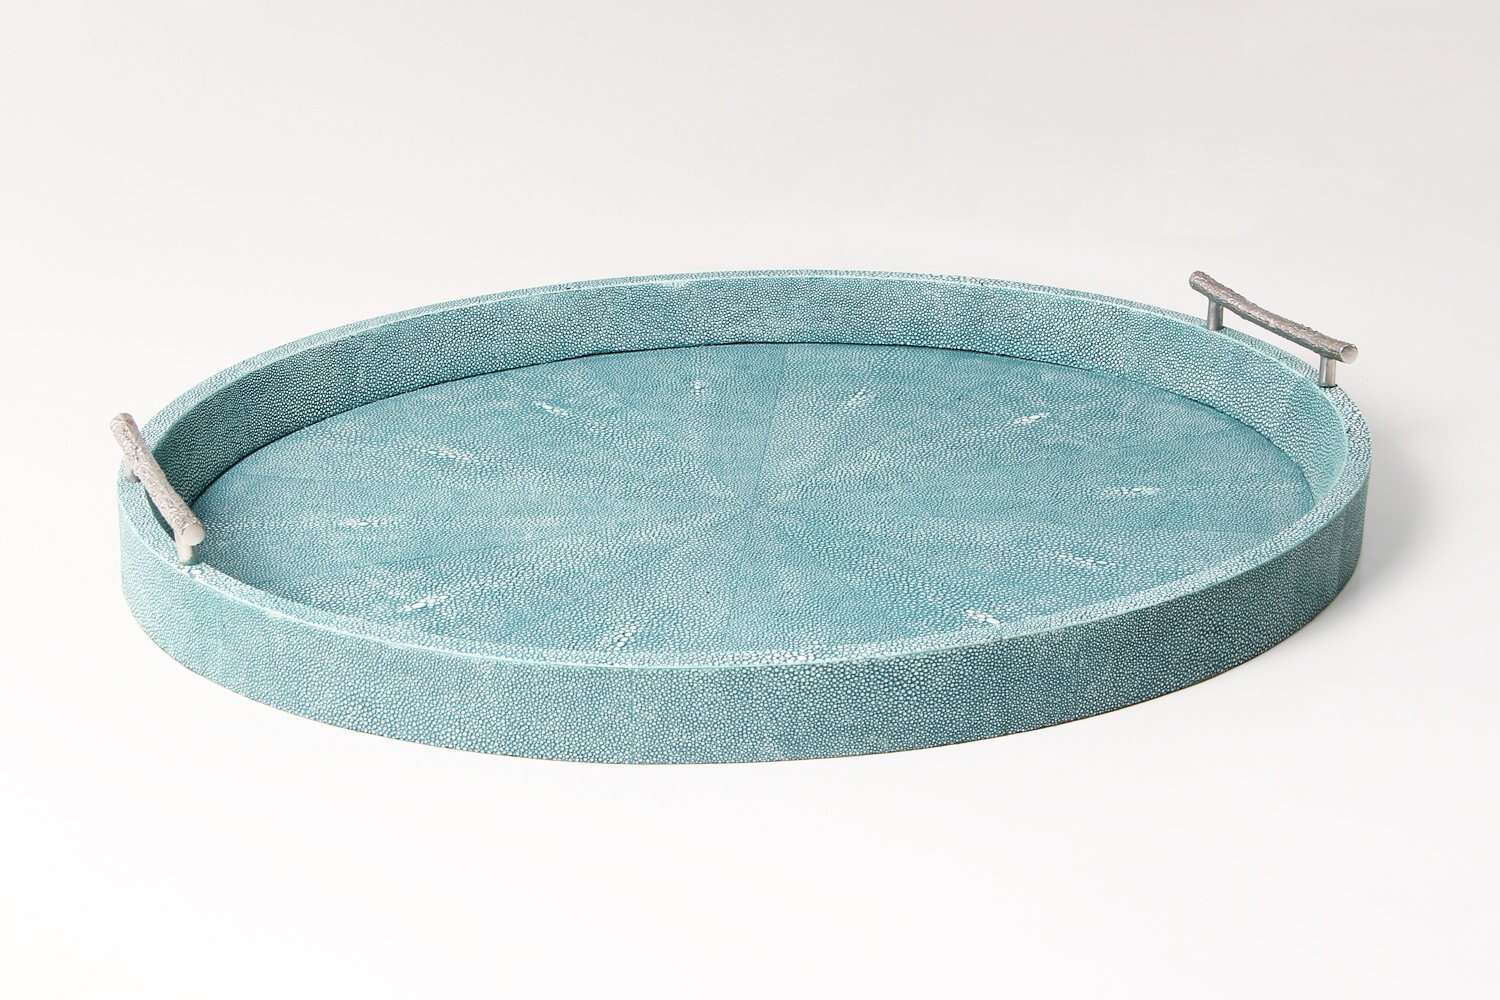 Serving tray chic Forwood Design teal shagreen drinks tray